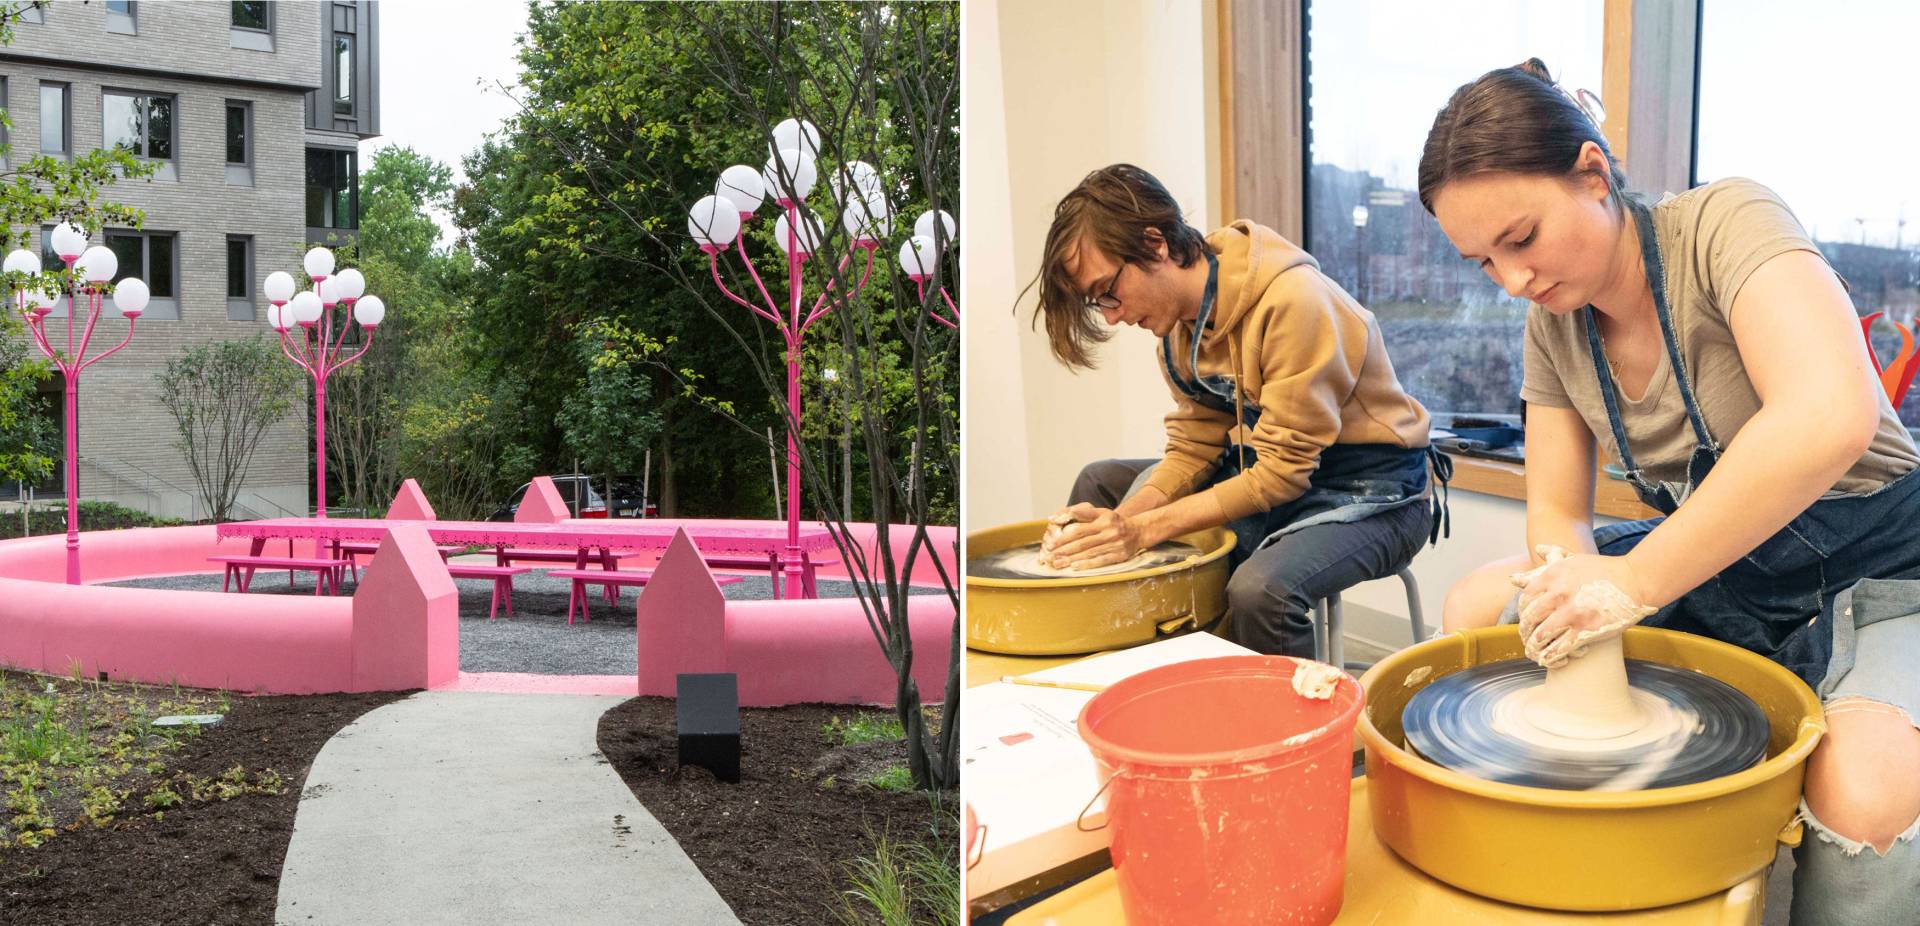 A candy-colored art installation and two students work at the ceramics wheel